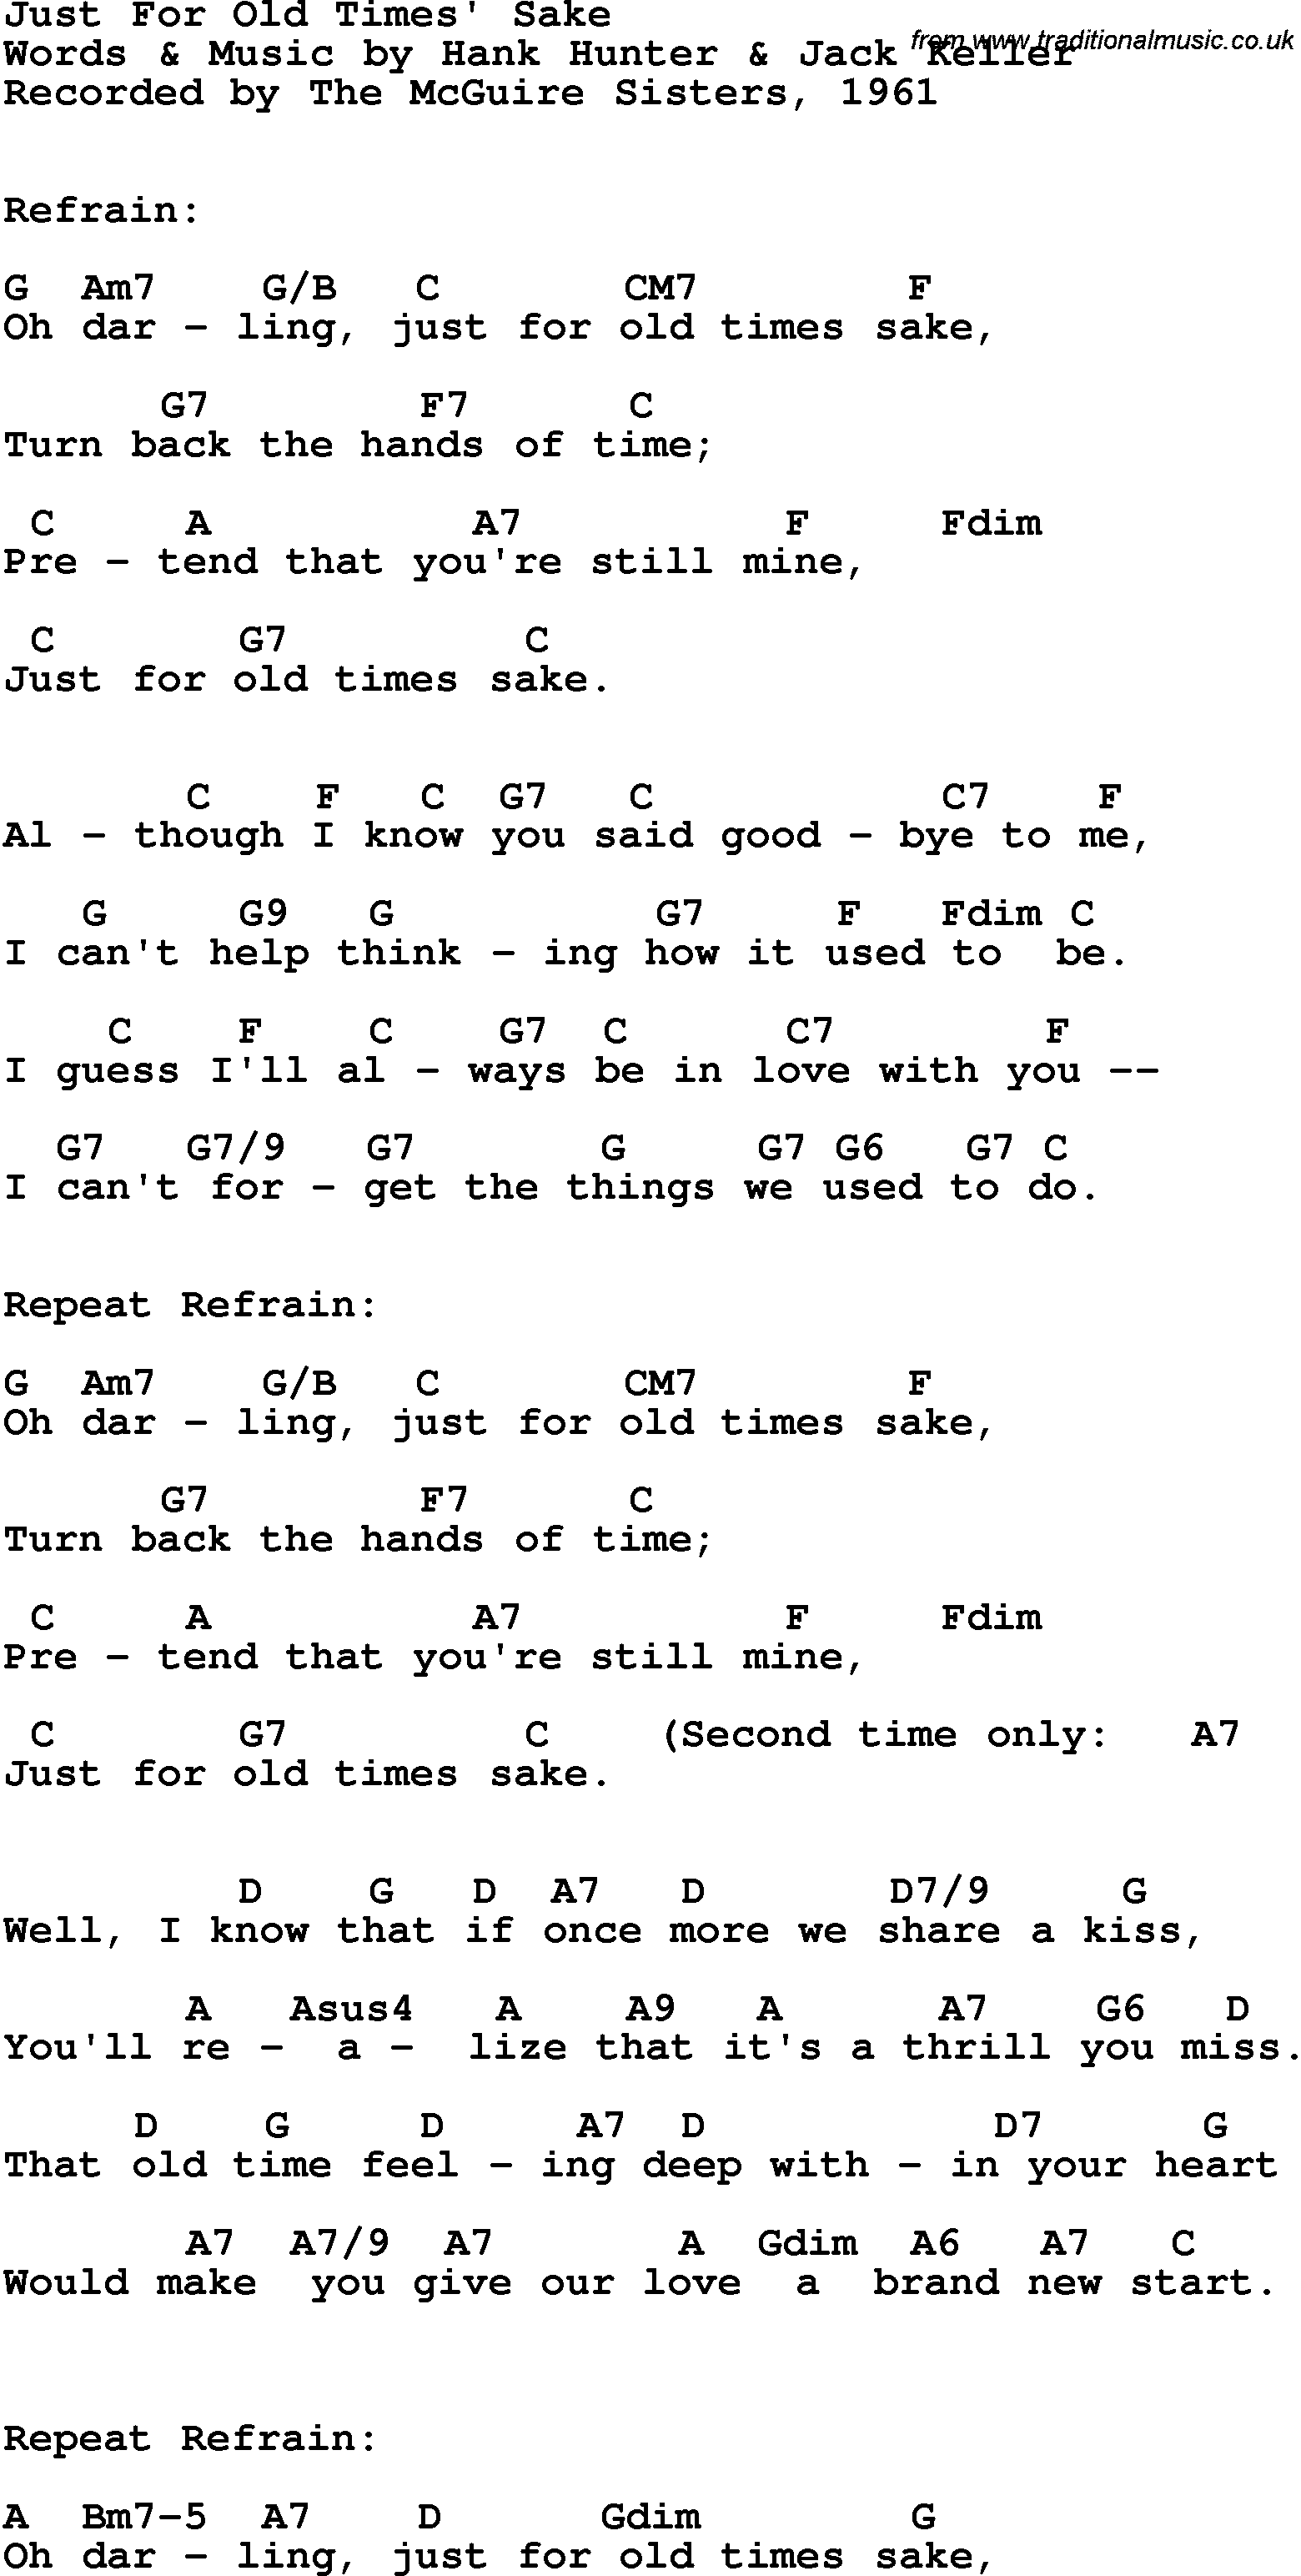 Song Lyrics with guitar chords for Just For Old Times' Sake - Mcguire Sisters, 1961